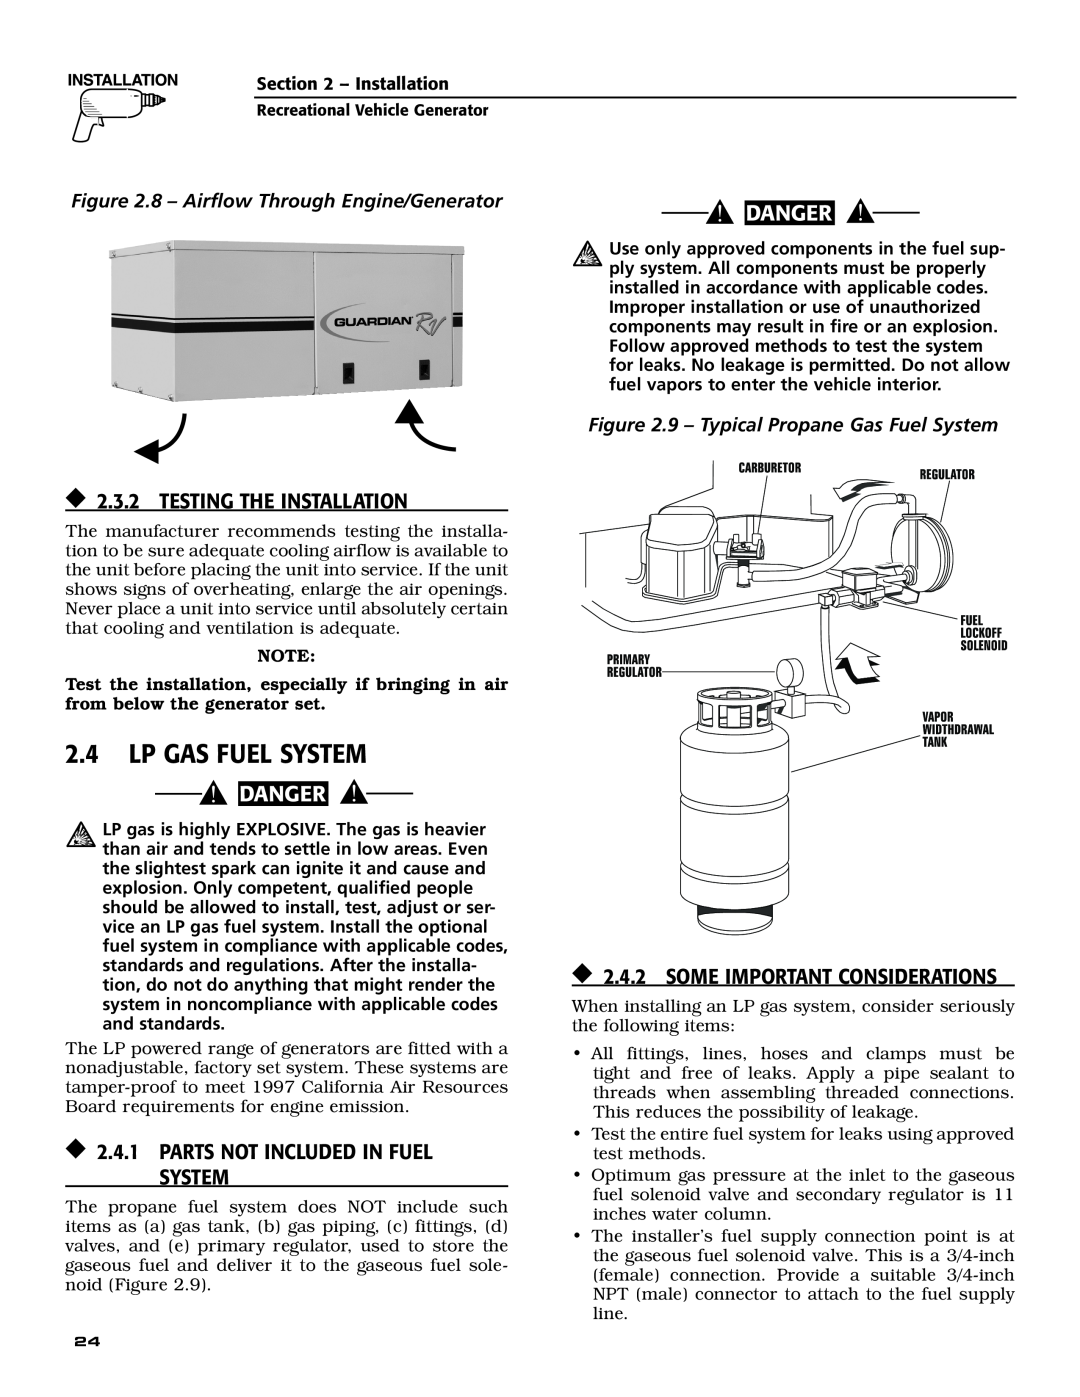 Guardian Technologies 004701-0 2.4LP Gas Fuel System, 2.3.2 TESTING THE INSTALLATION, 9 – Typical Propane Gas Fuel System 